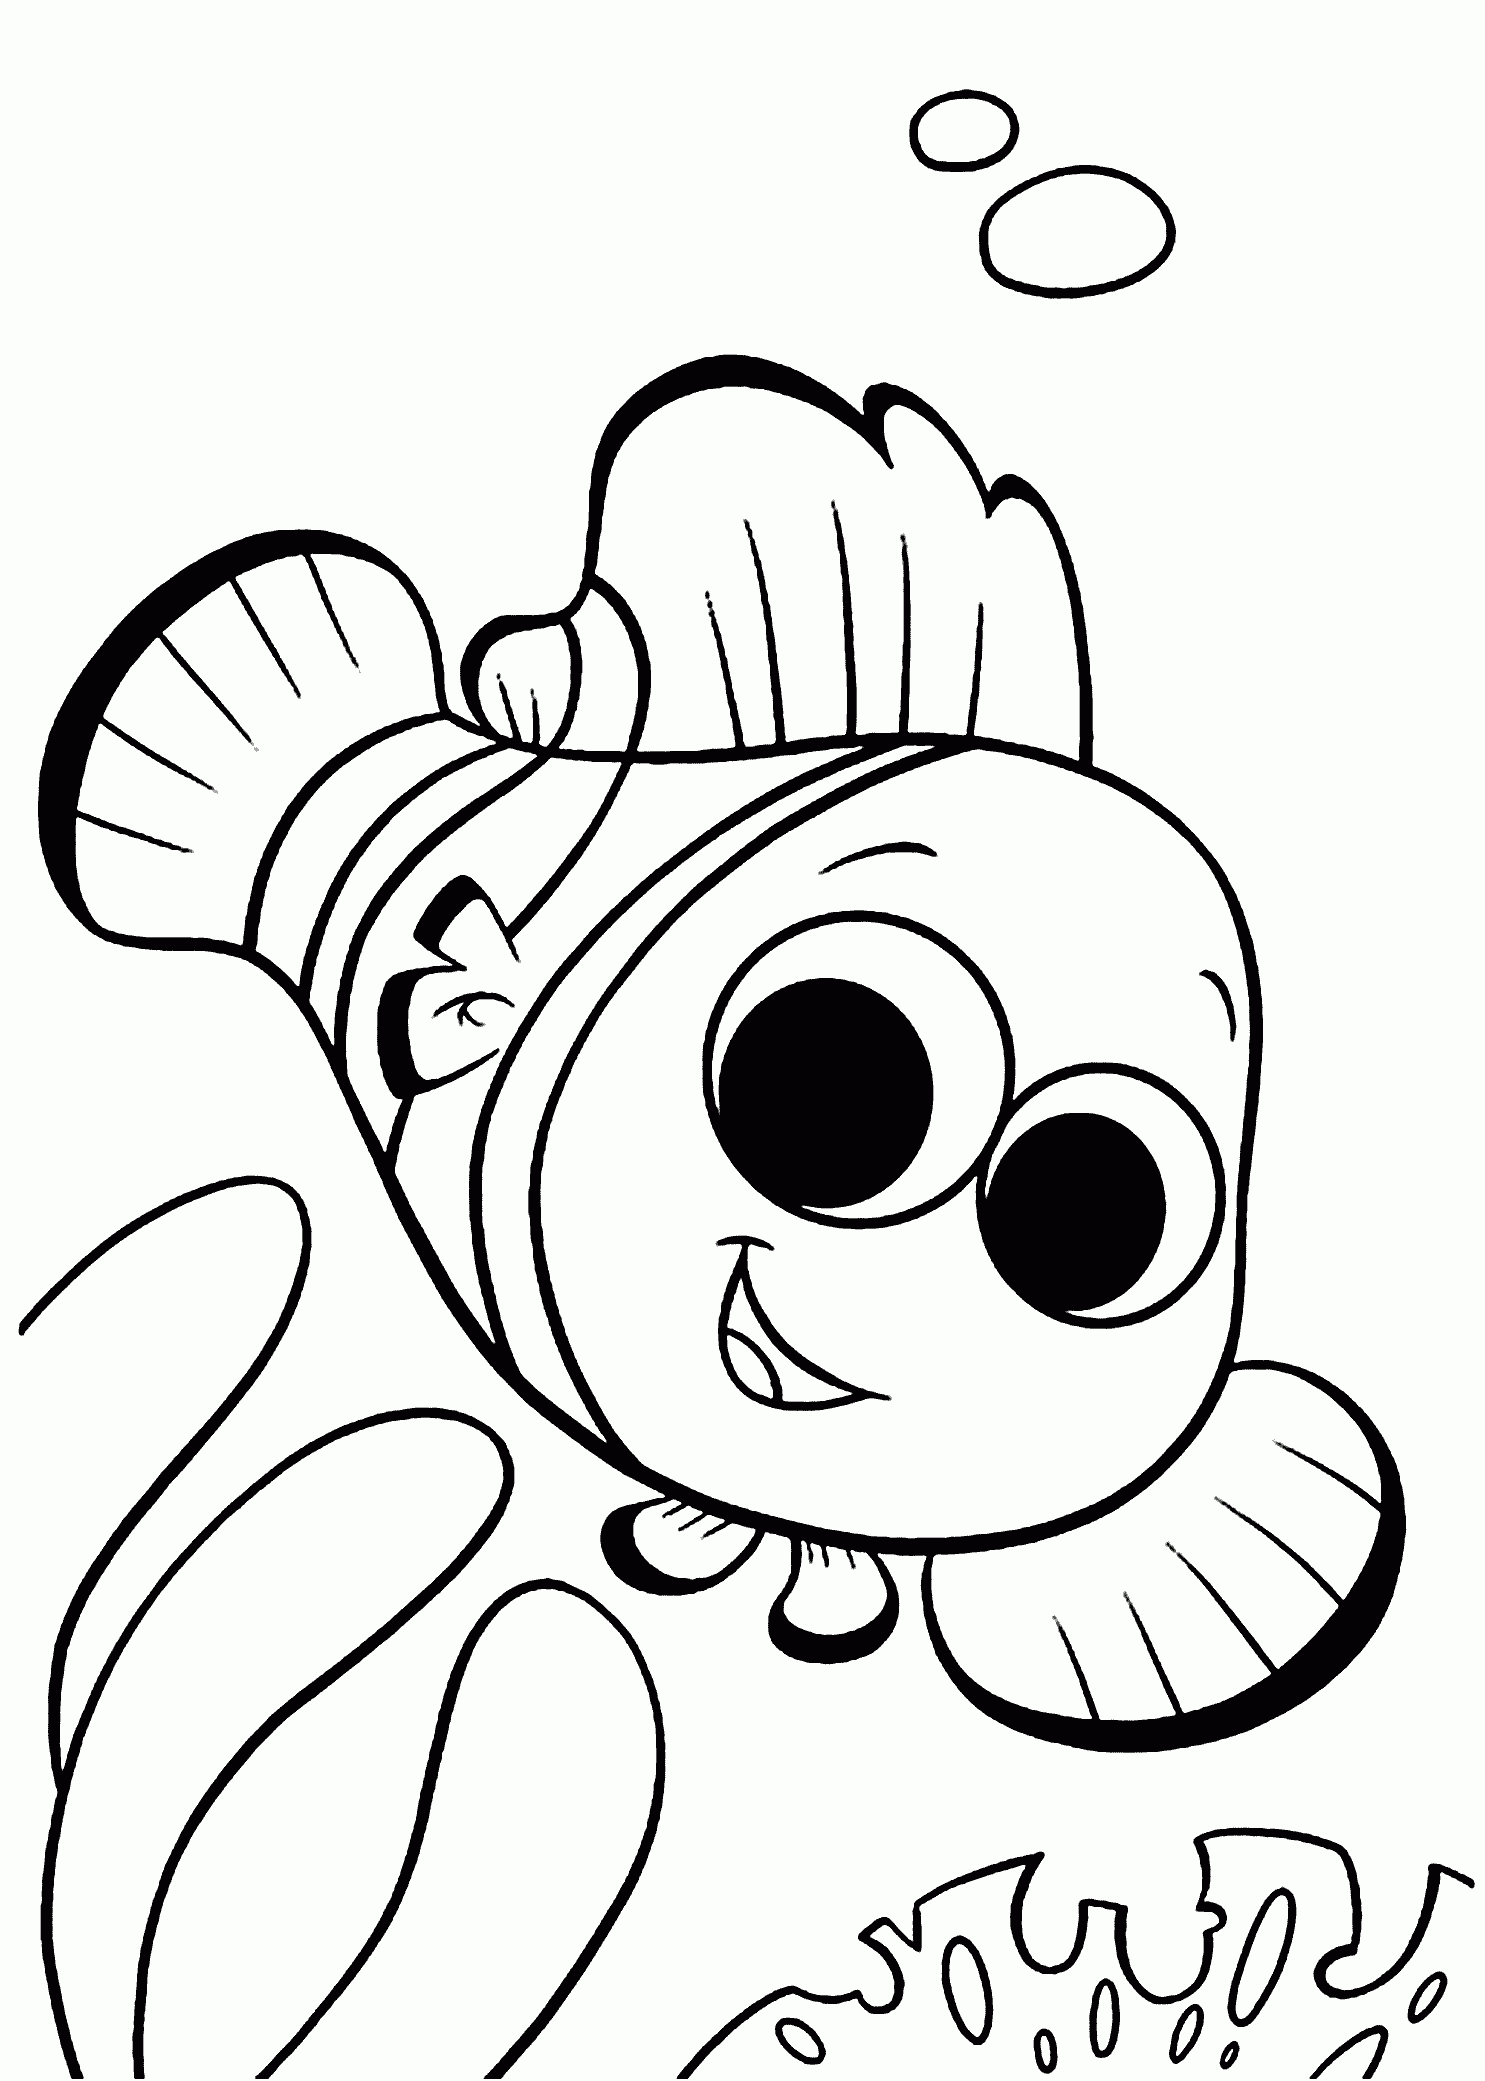 best finding nemo coloring pages for kids printable free coloring impressive principles free coloring pages for children u0026 39 s church 